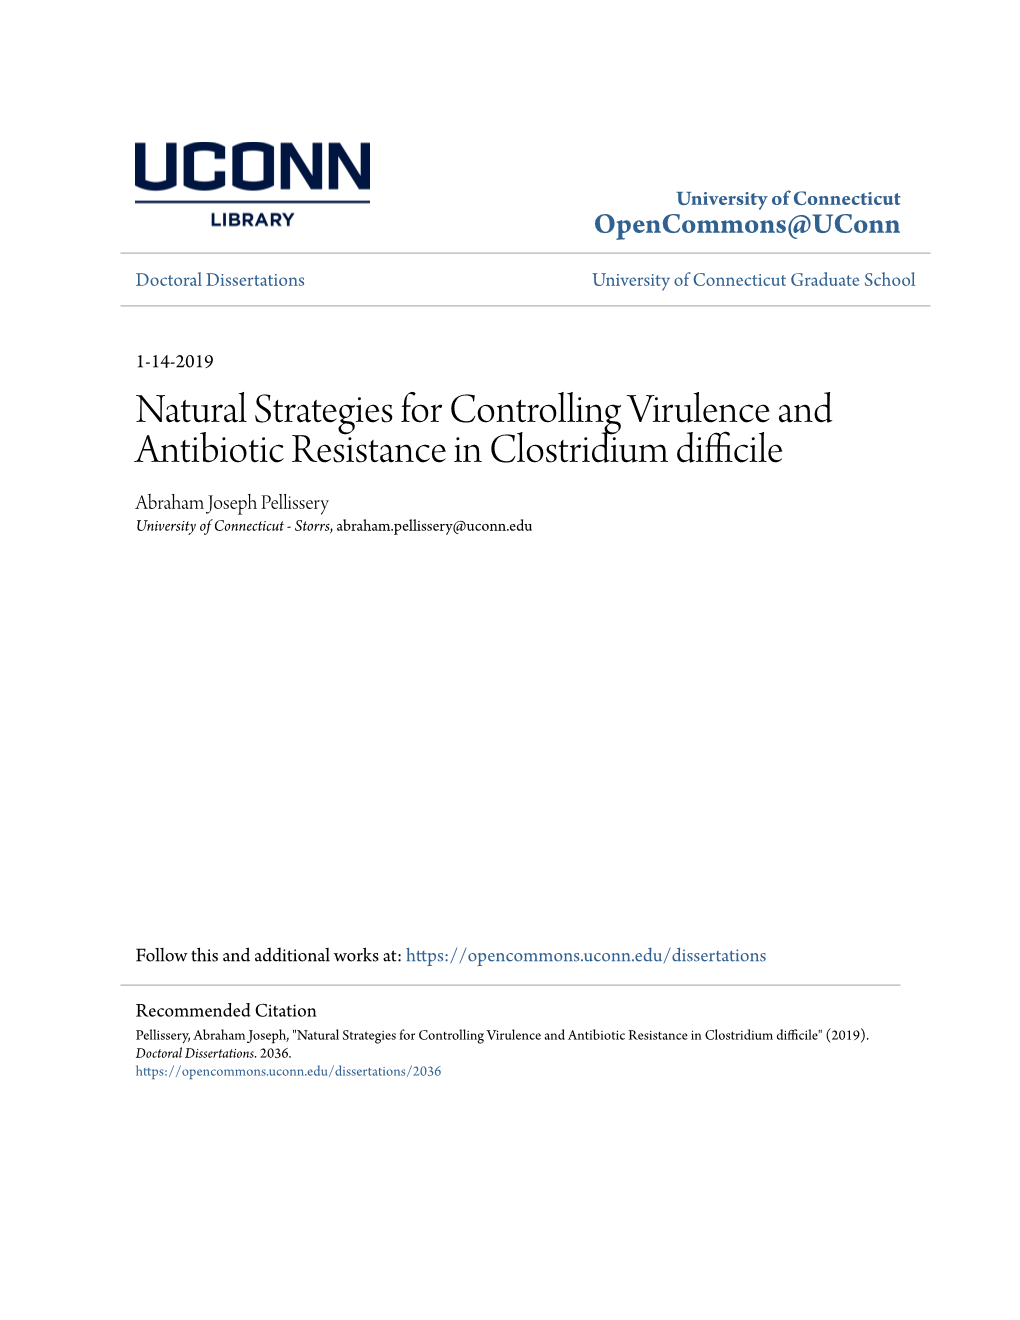 Natural Strategies for Controlling Virulence and Antibiotic Resistance